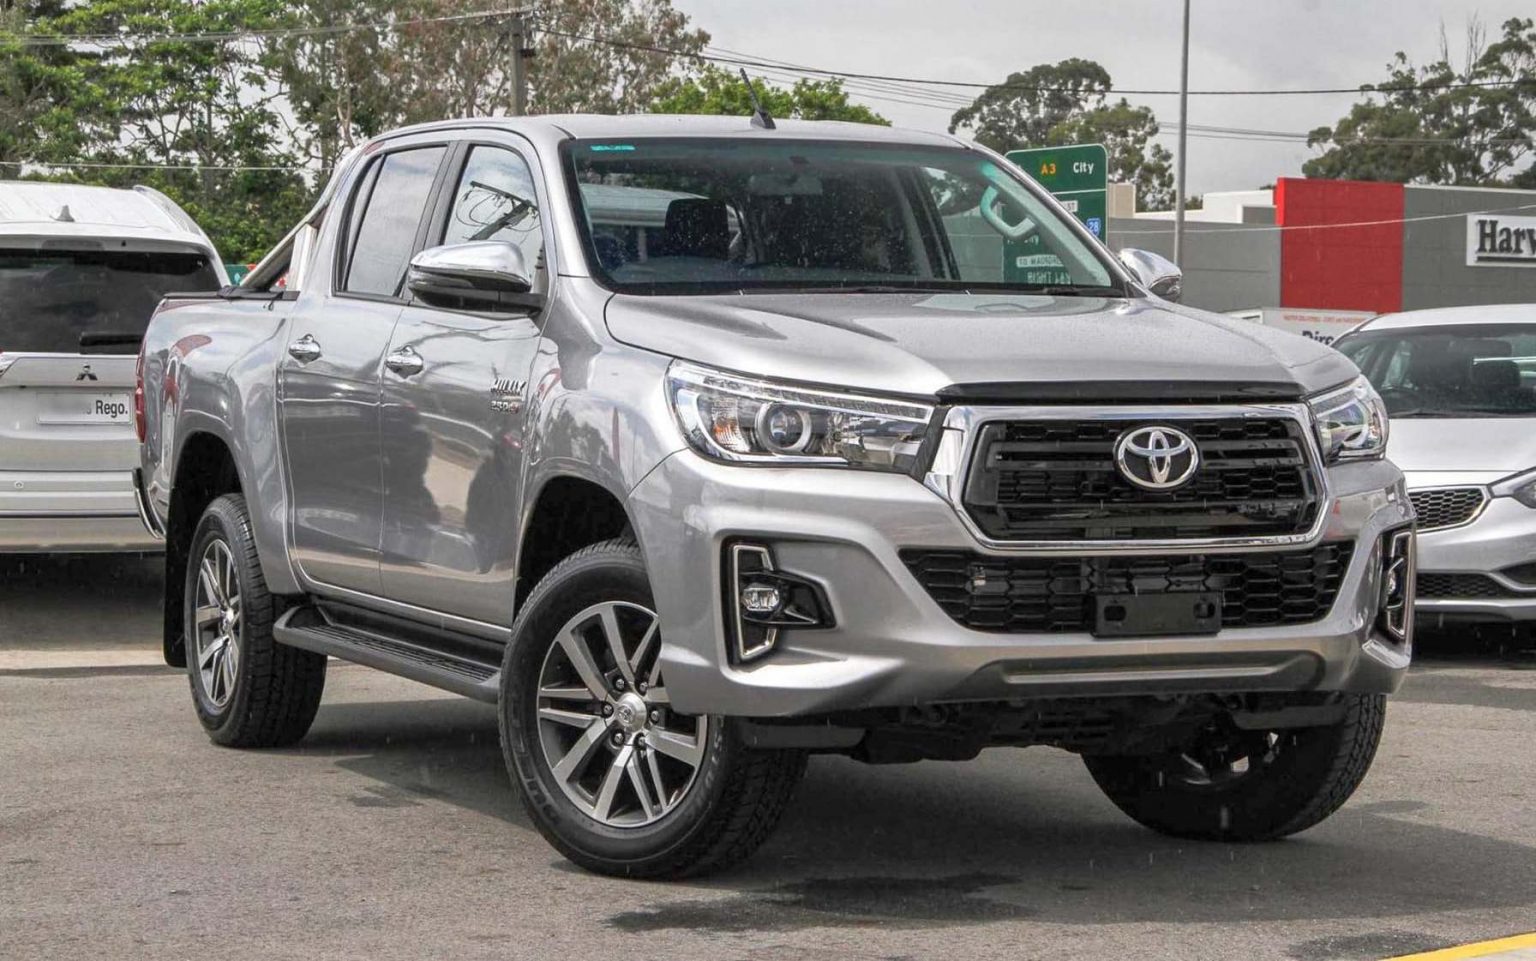 2019 Toyota Hilux Silver Auto 4WD - Commercial Trucks For Sale ...